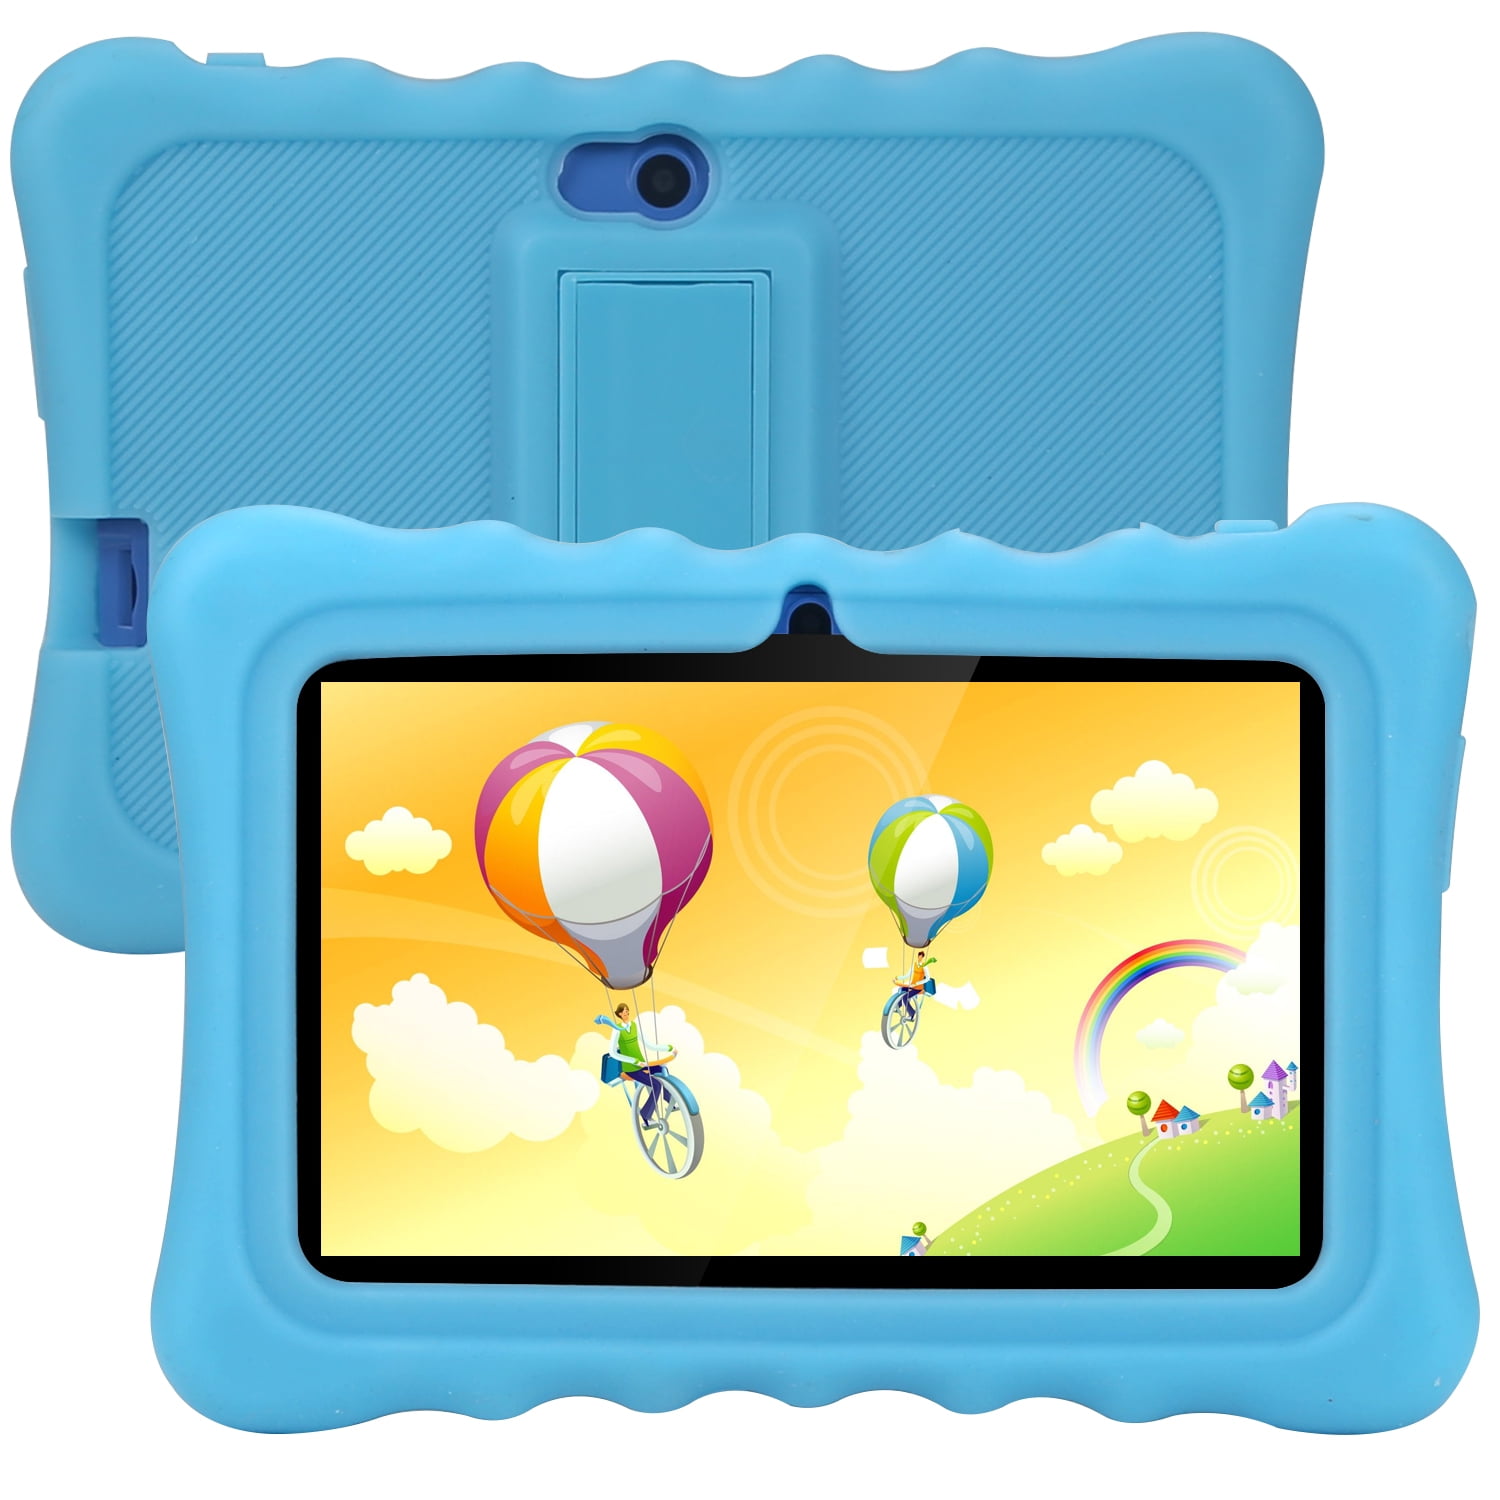 Tagital T7K Plus 7” Android Kids Tablet WiFi Camera for Children ...